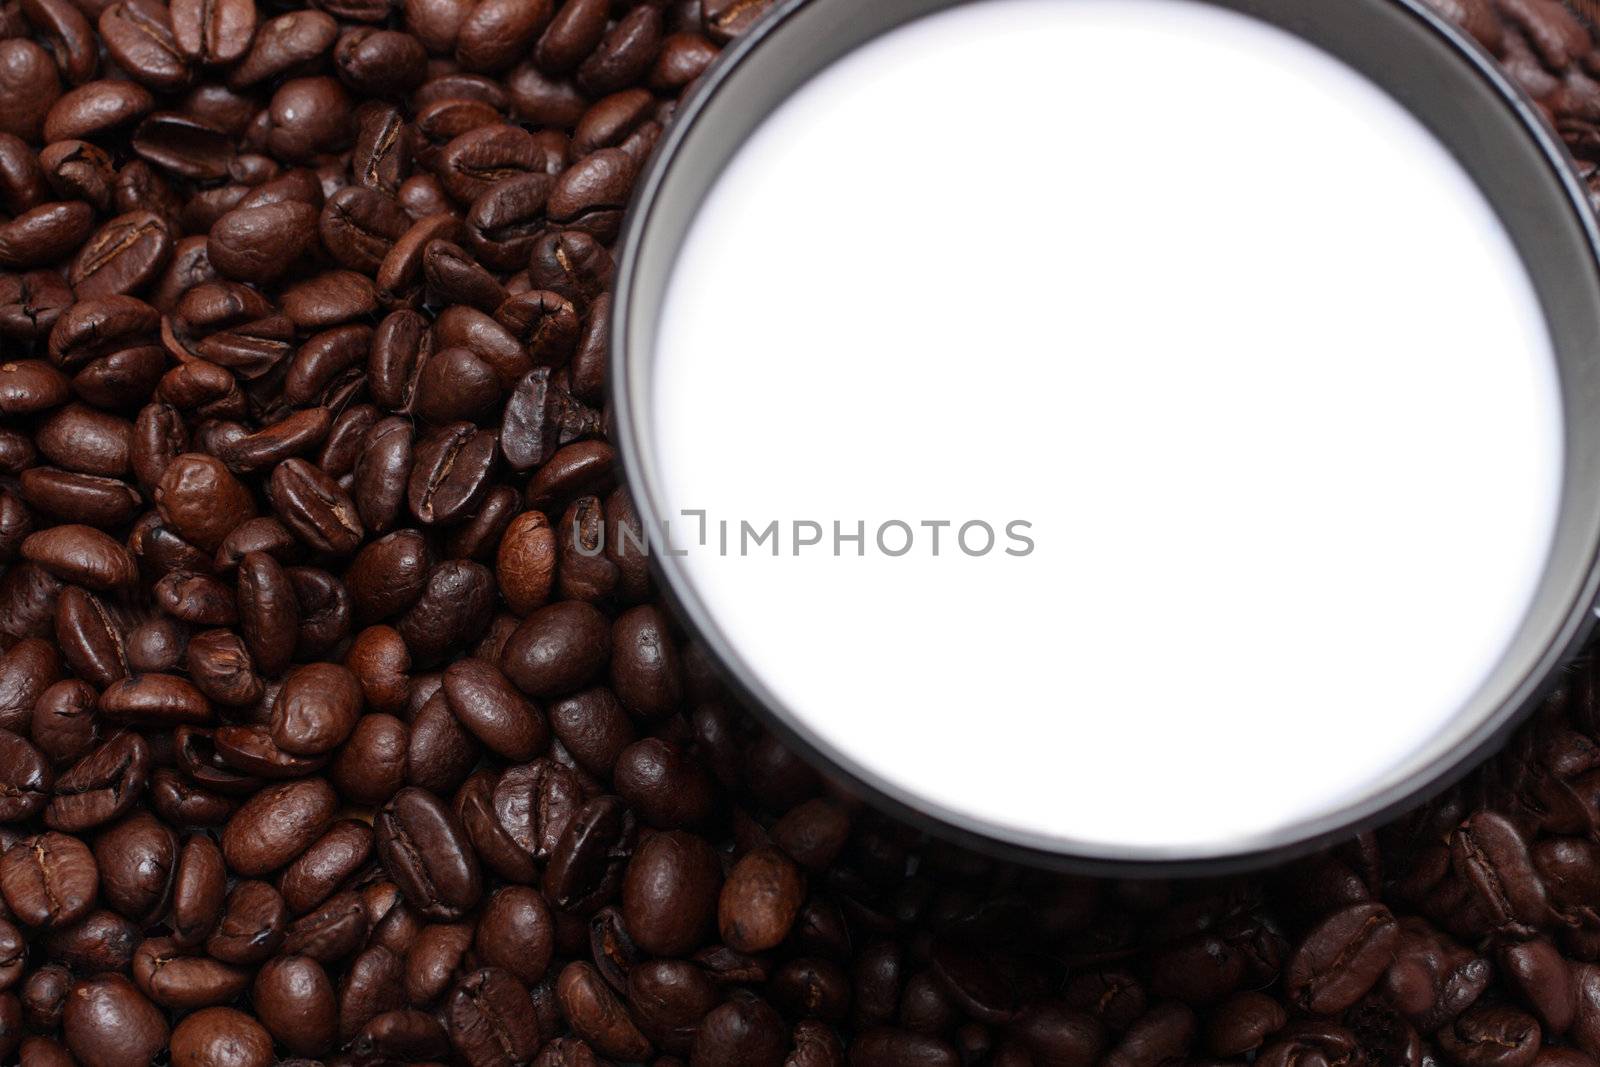 coffee beans and milk in cup close-up